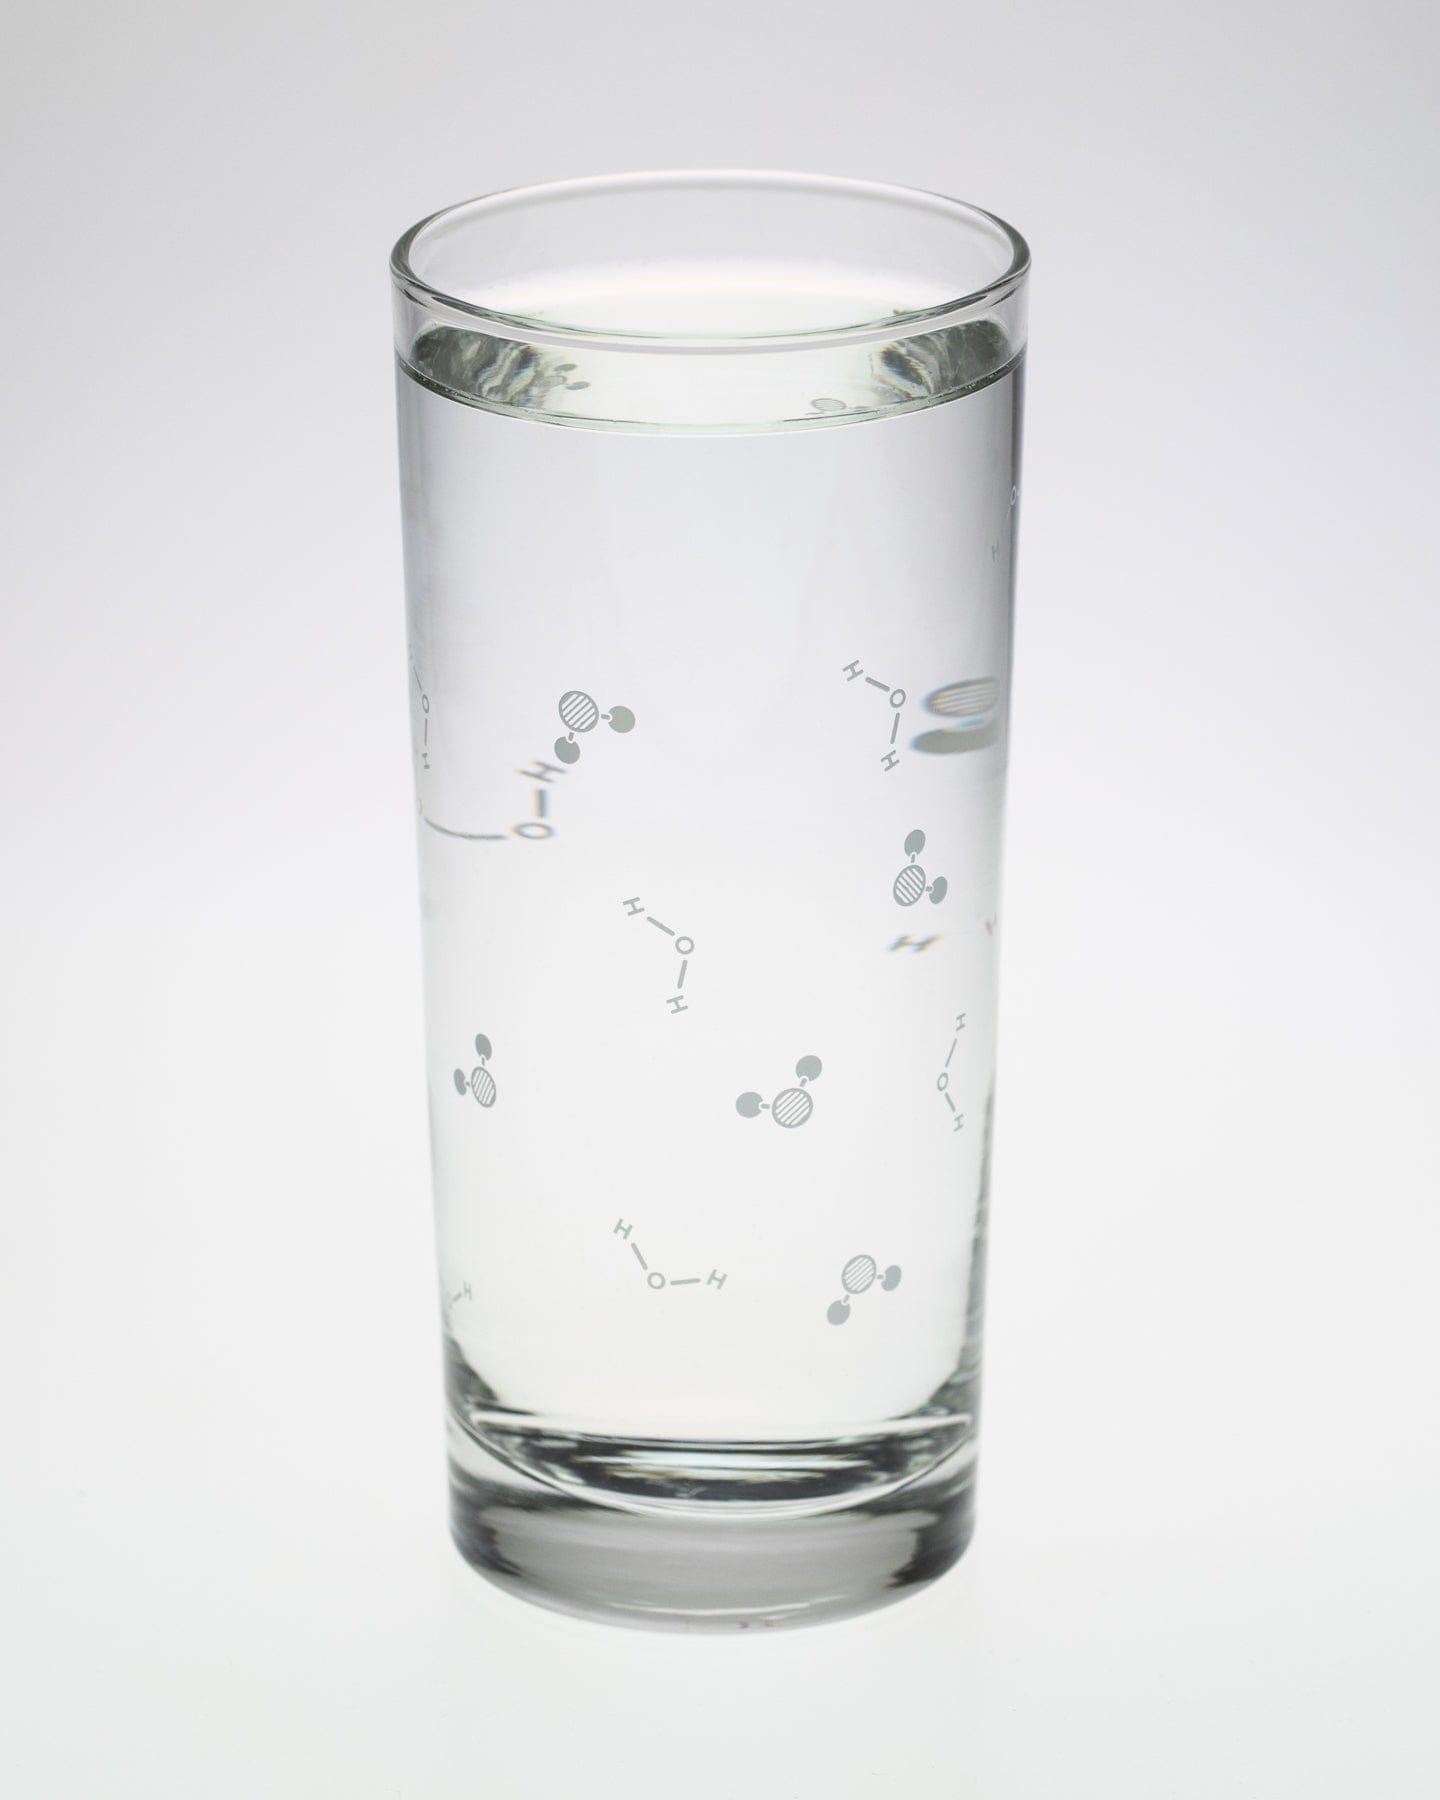 Chemisry of Beer Glass - Beer Science | Cognitive Surplus Single